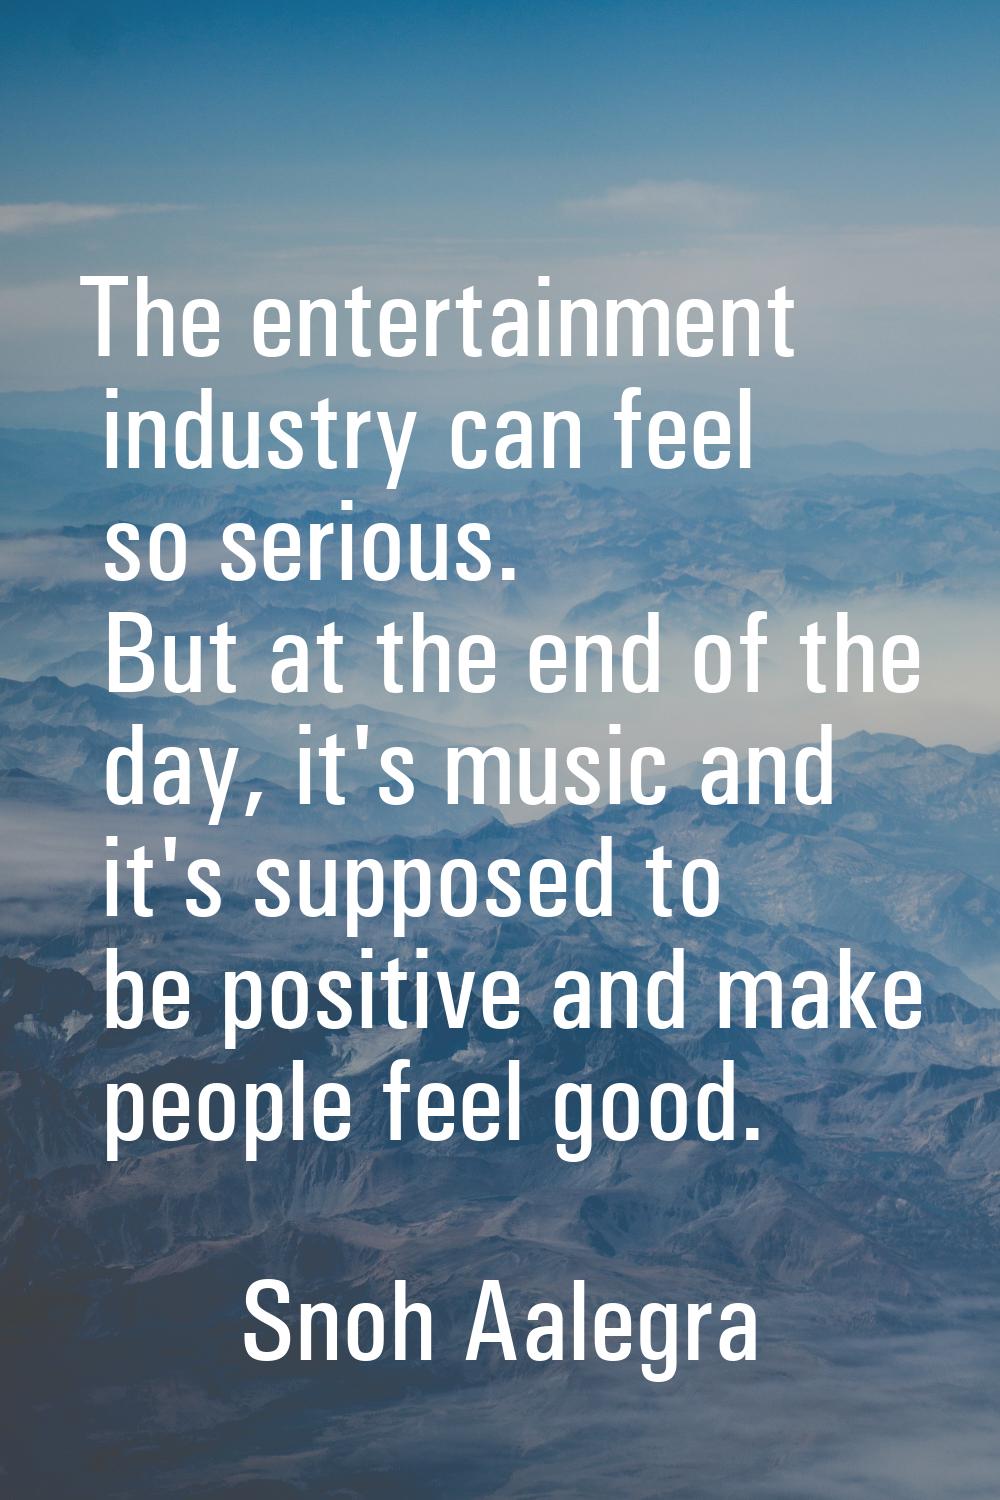 The entertainment industry can feel so serious. But at the end of the day, it's music and it's supp